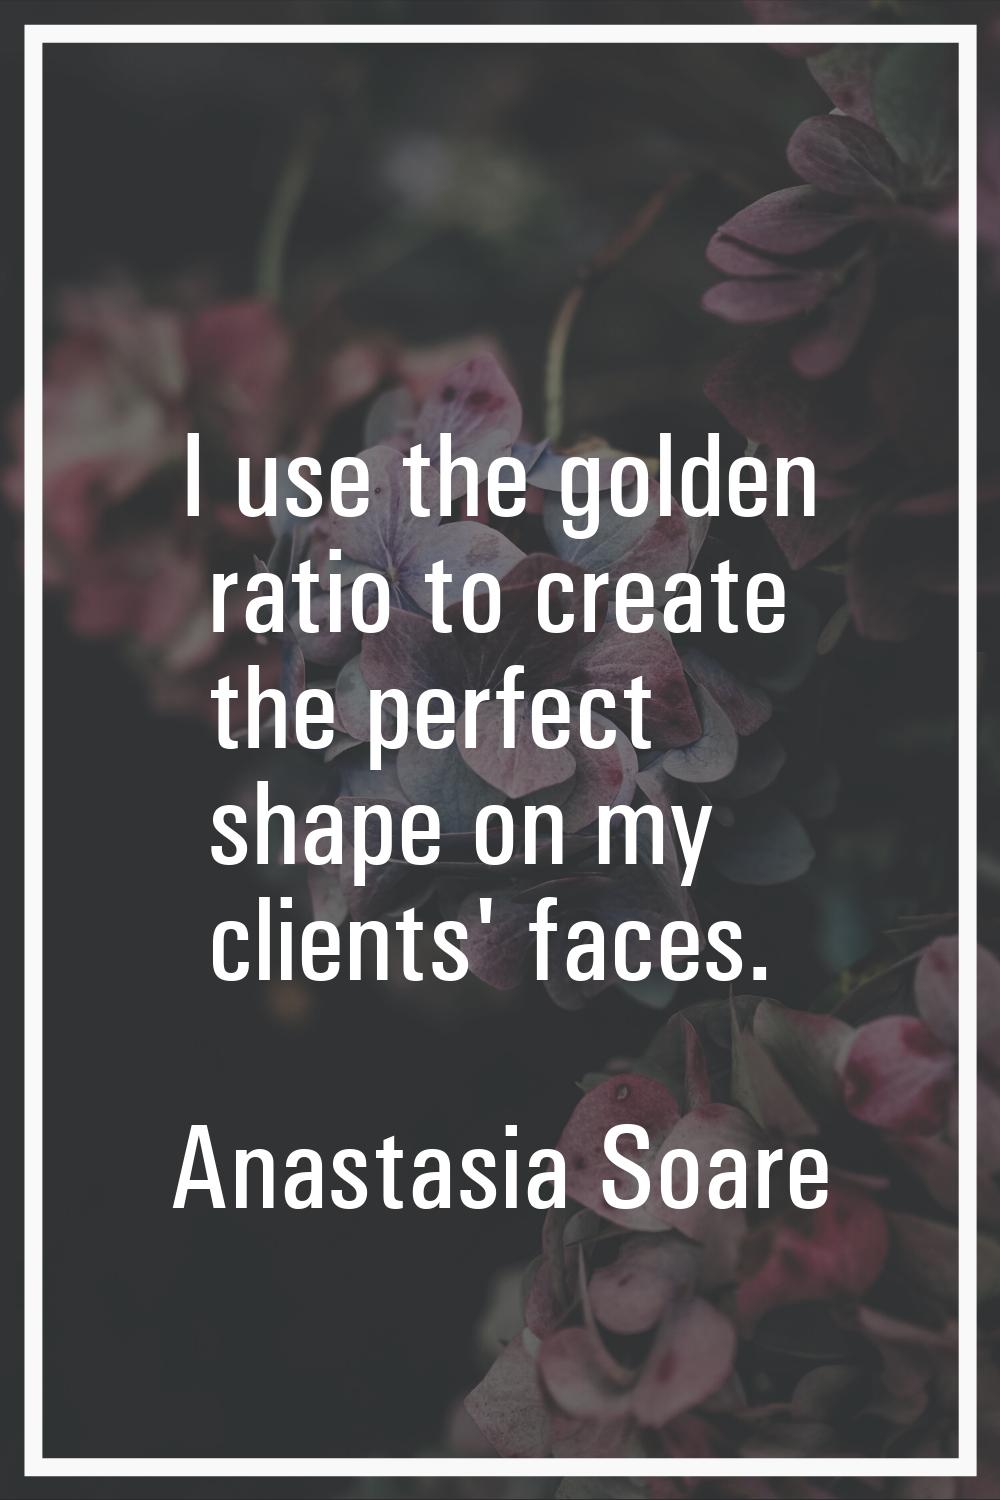 I use the golden ratio to create the perfect shape on my clients' faces.